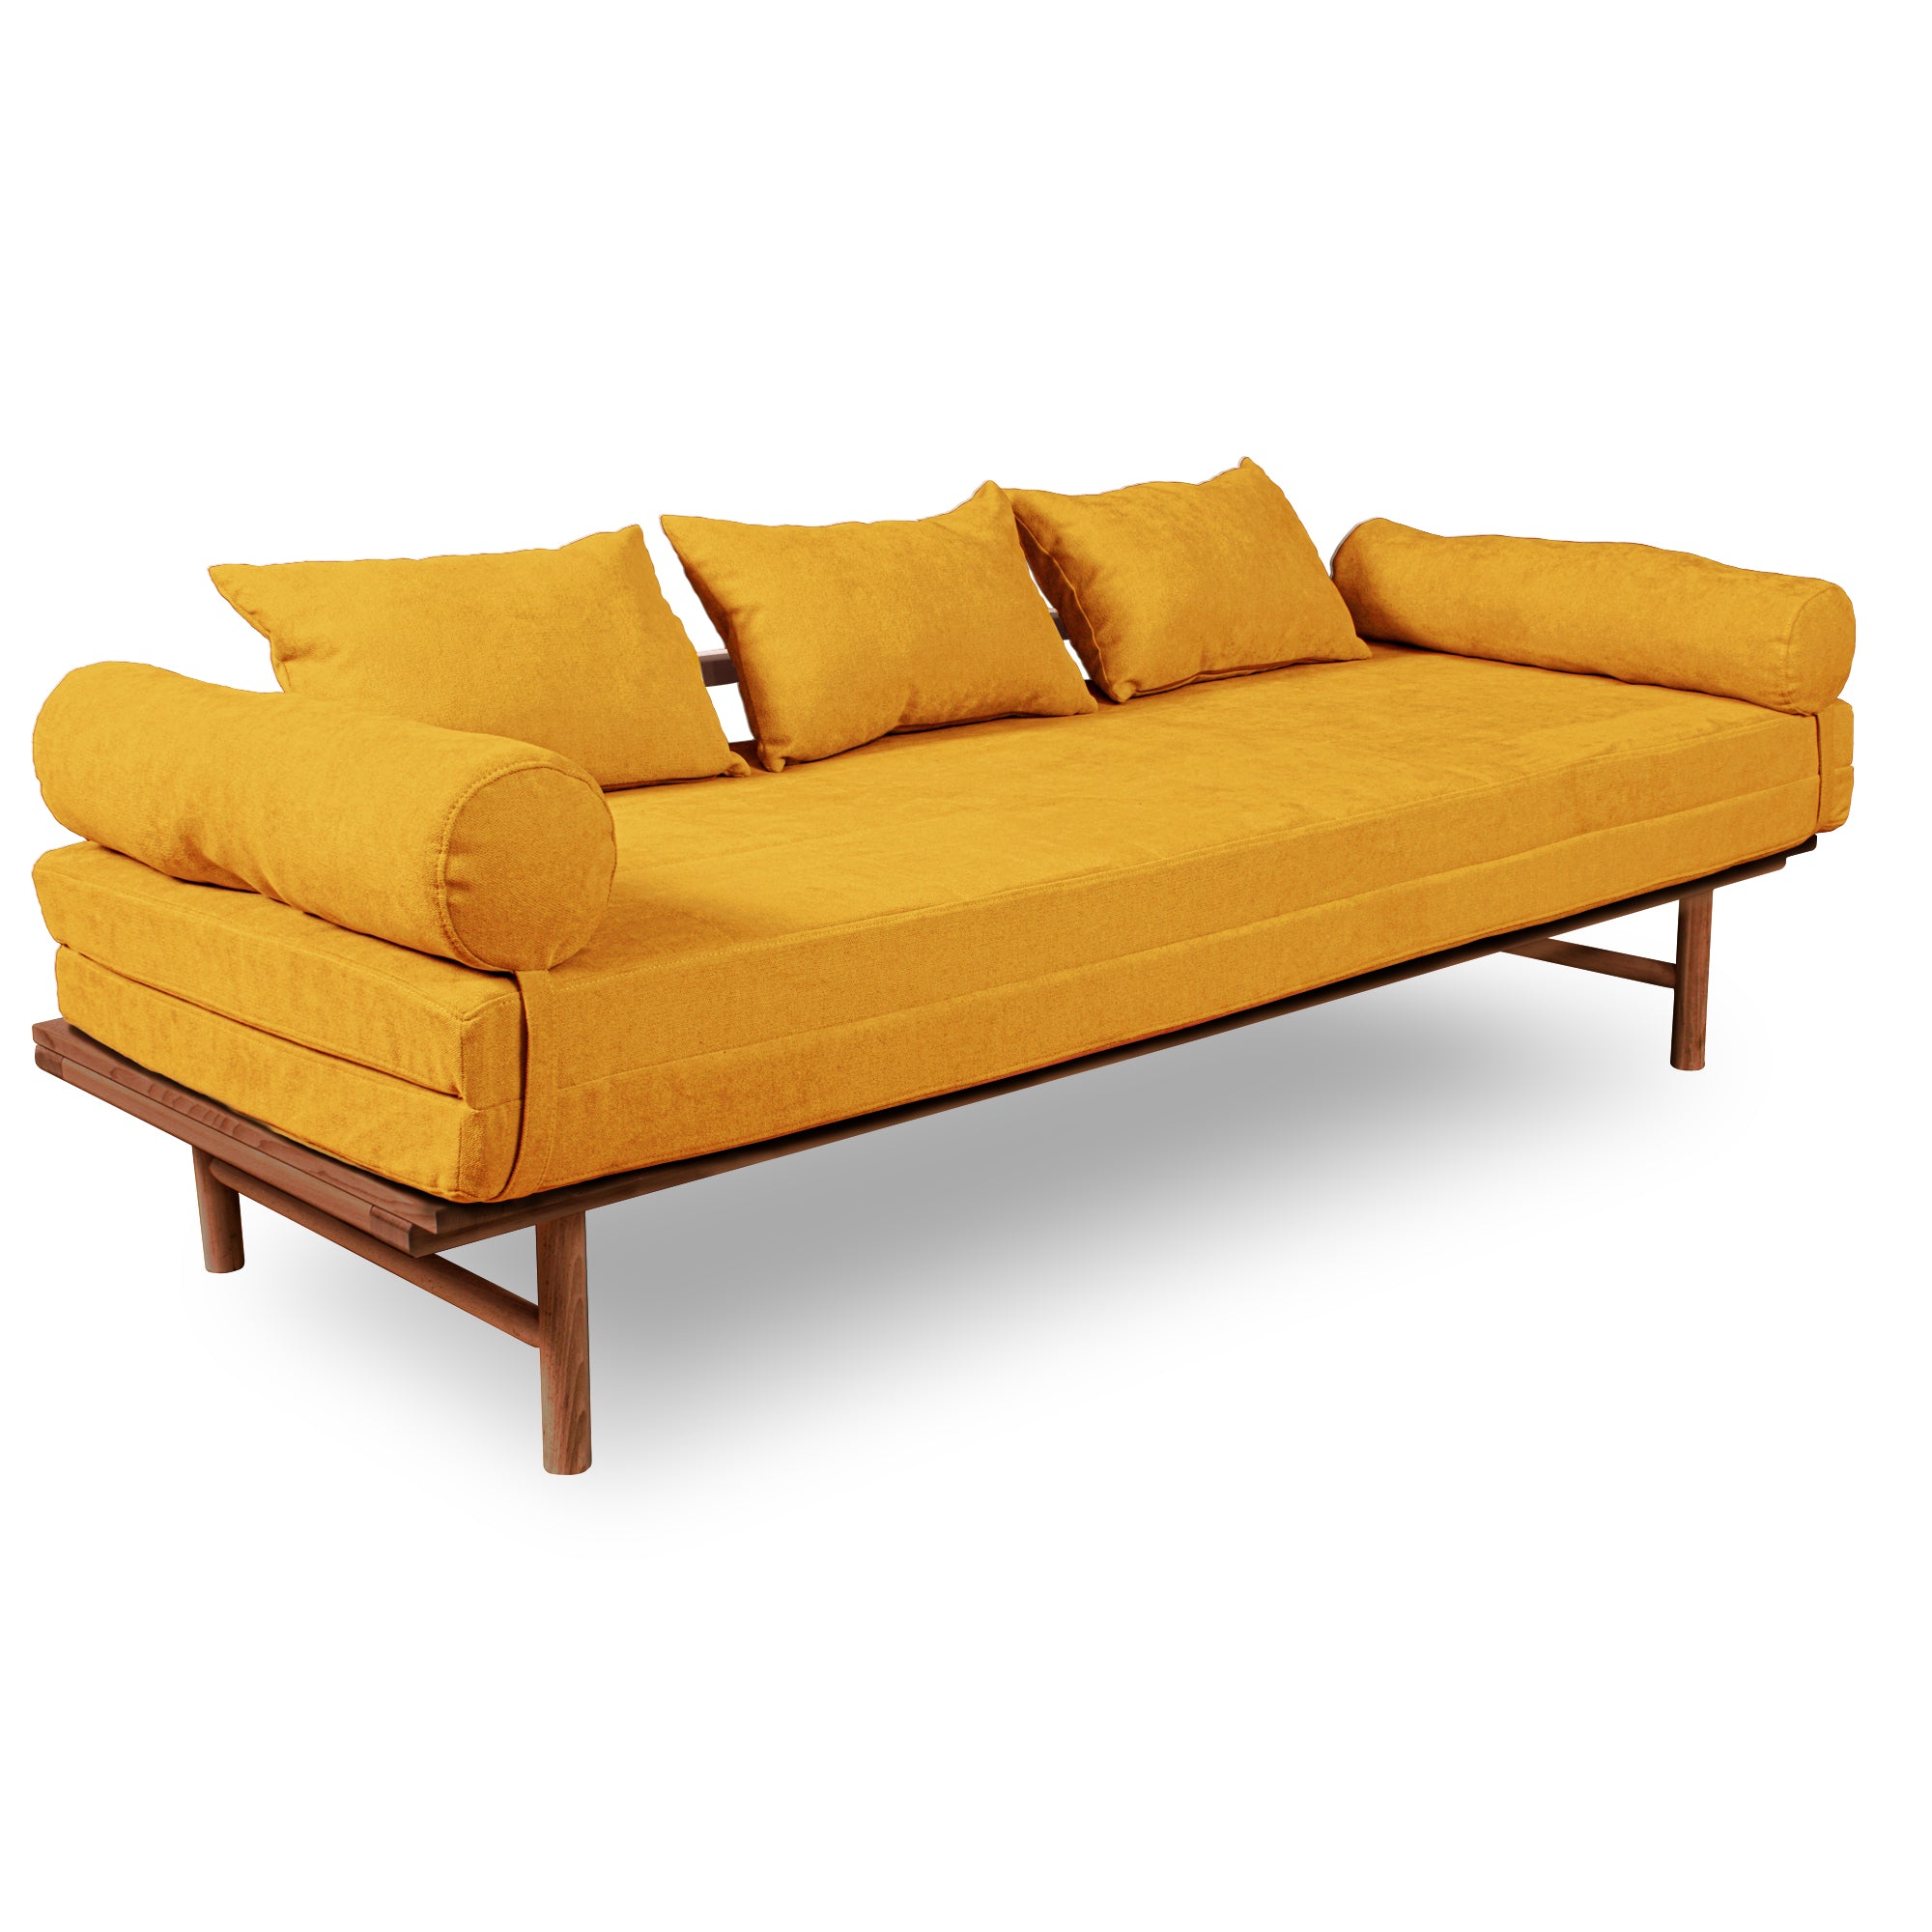 Le MAR Folding Daybed, Beech Wood Frame, Caramel Colour-yellow upholstery